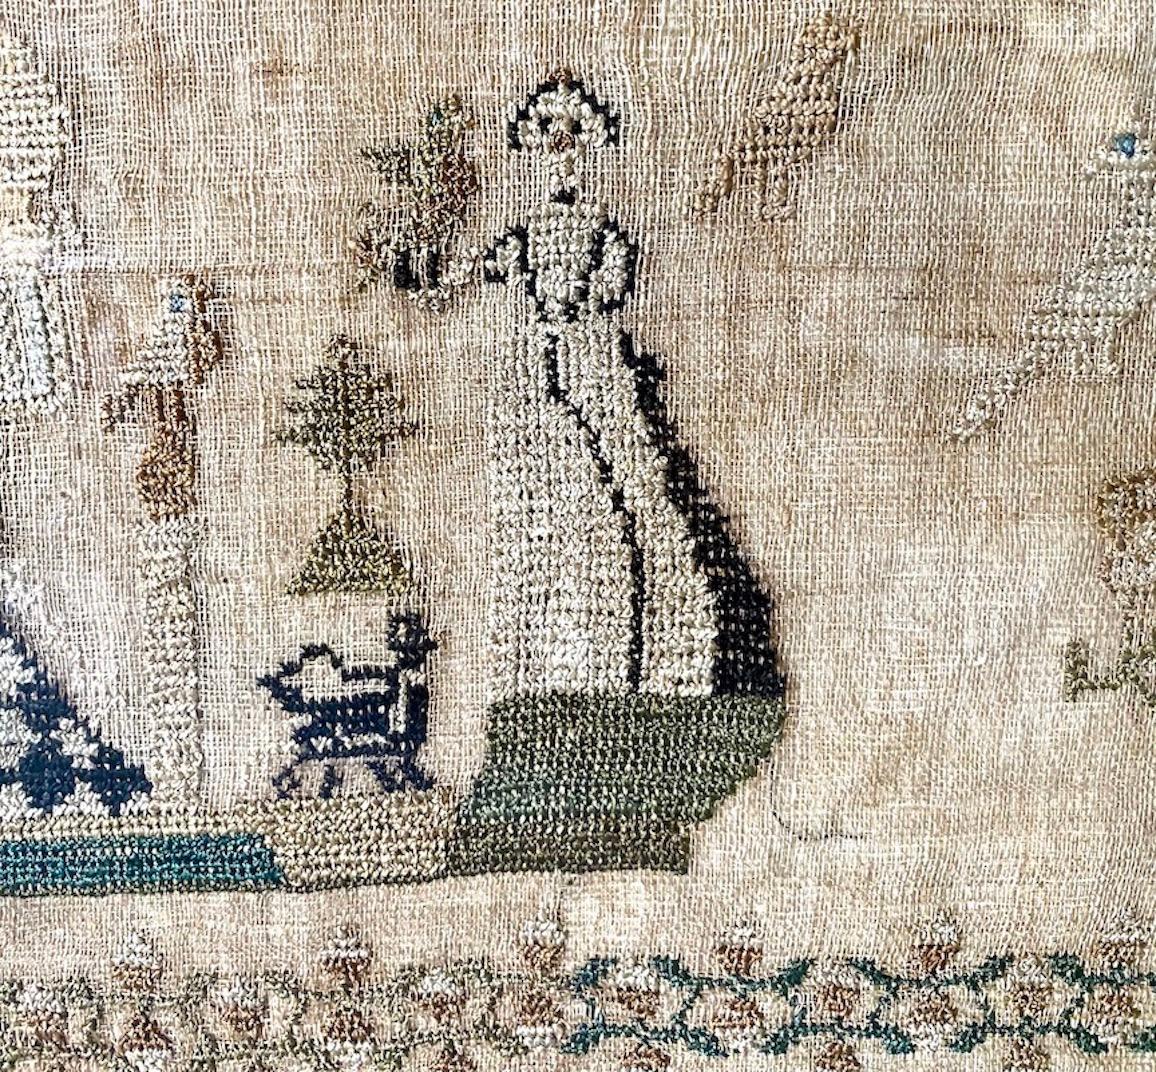 English Early 19th Century Needle Work Sampler by Ann Gould